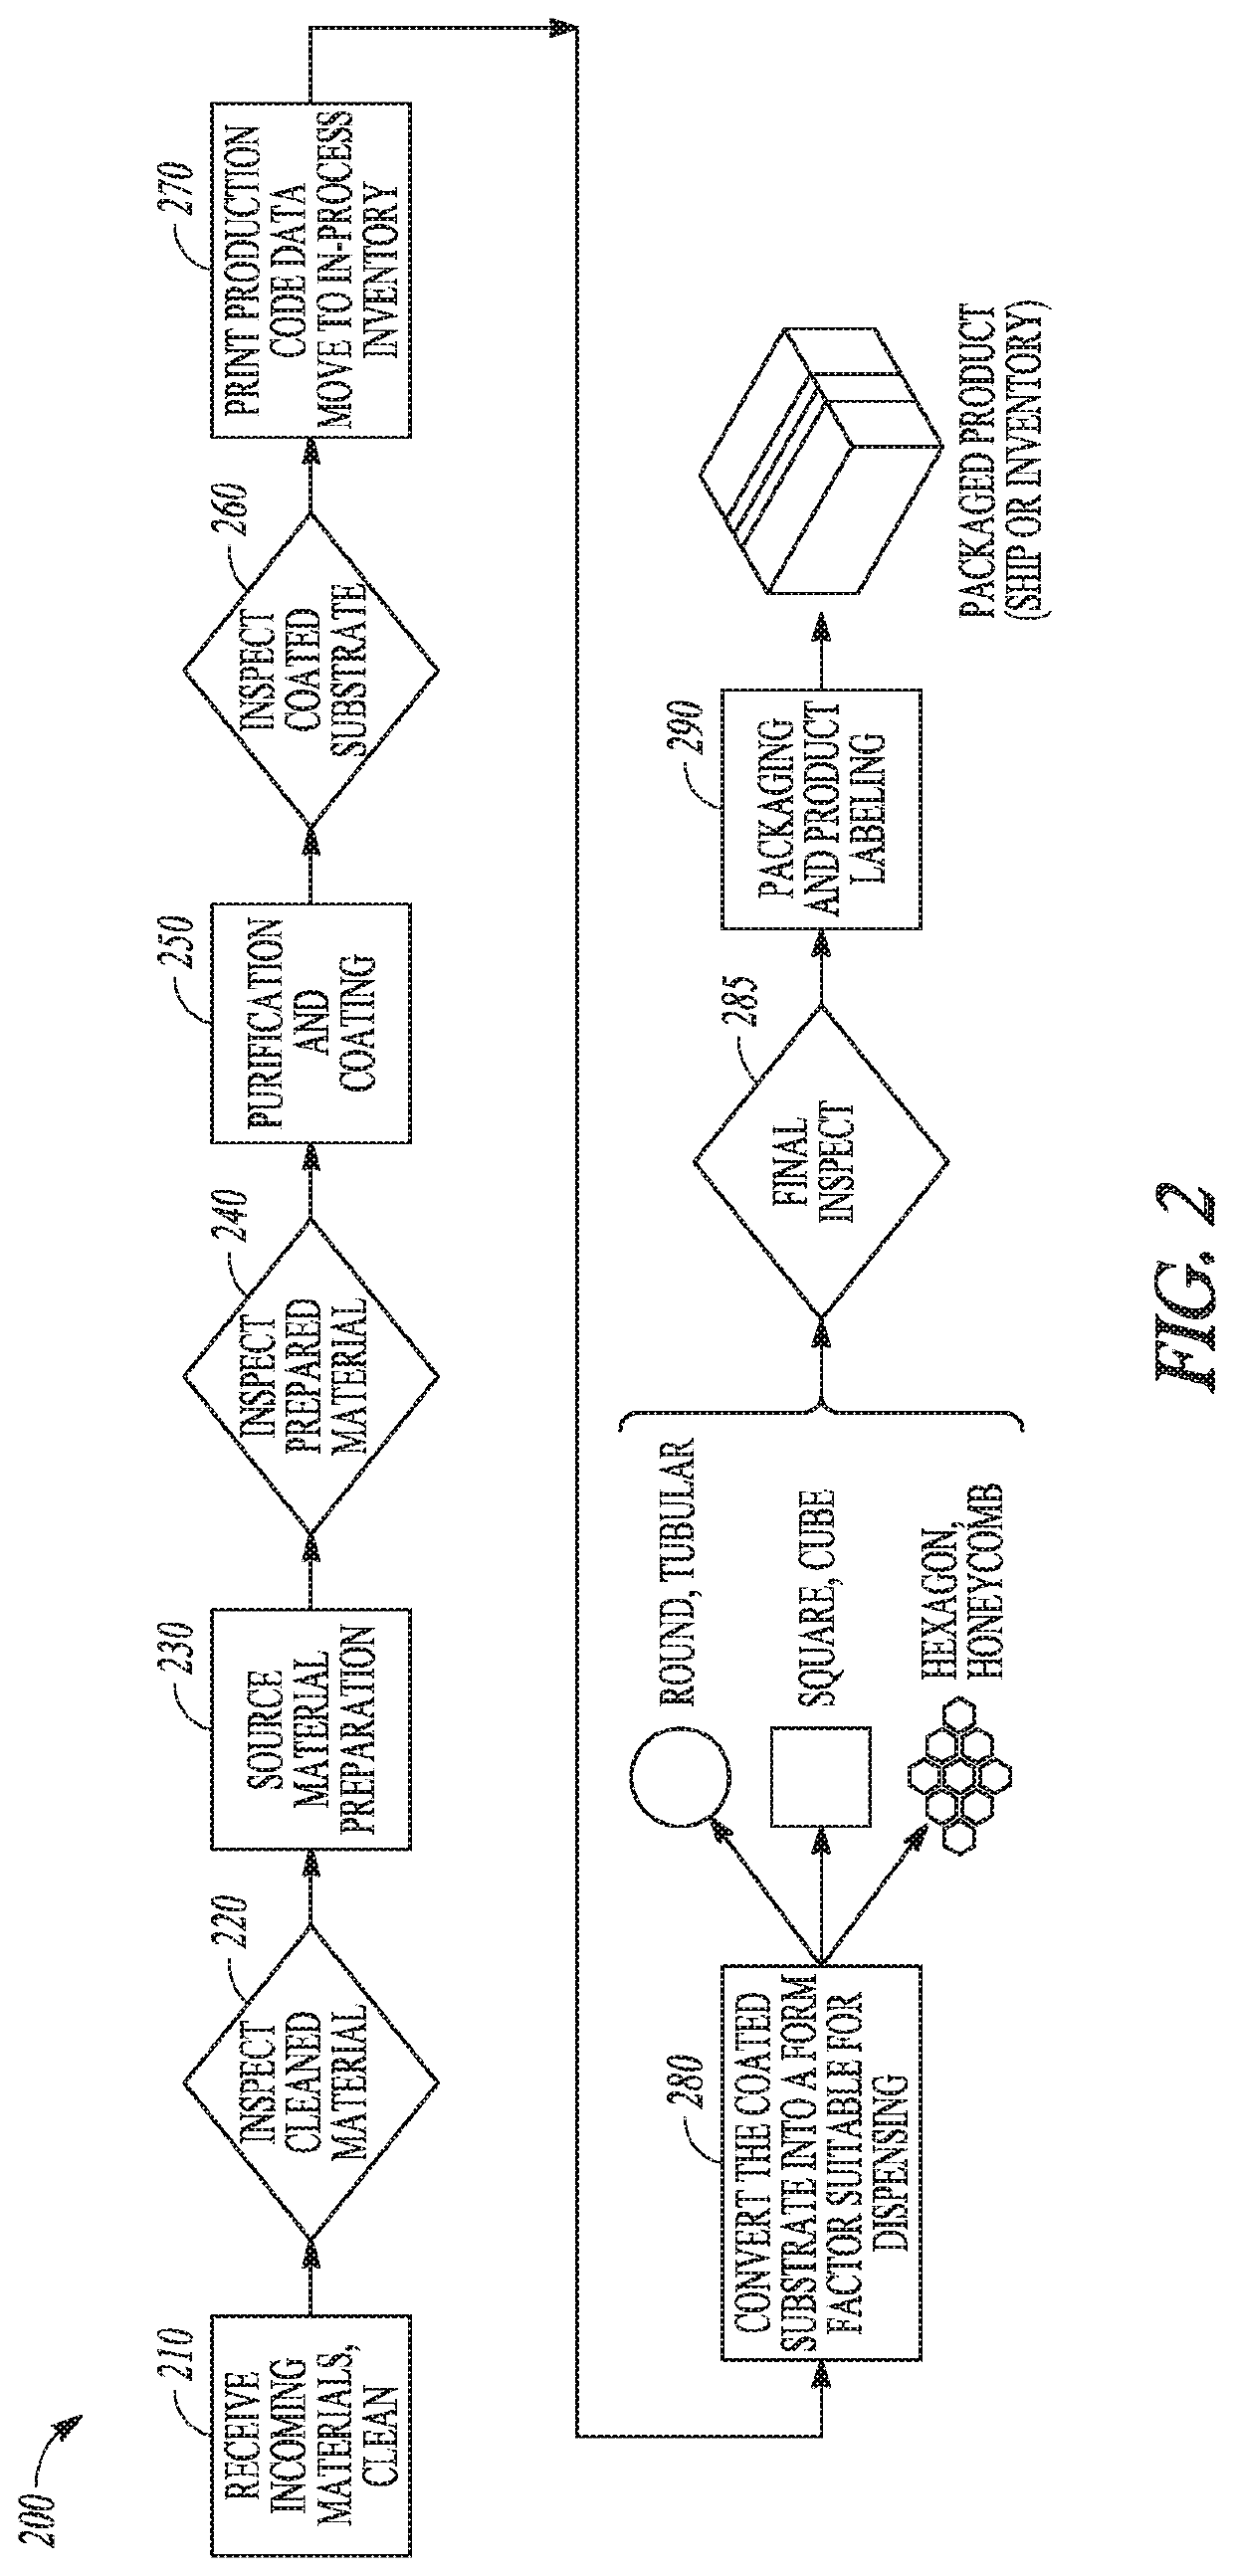 Methods and drug delivery devices using cannabis